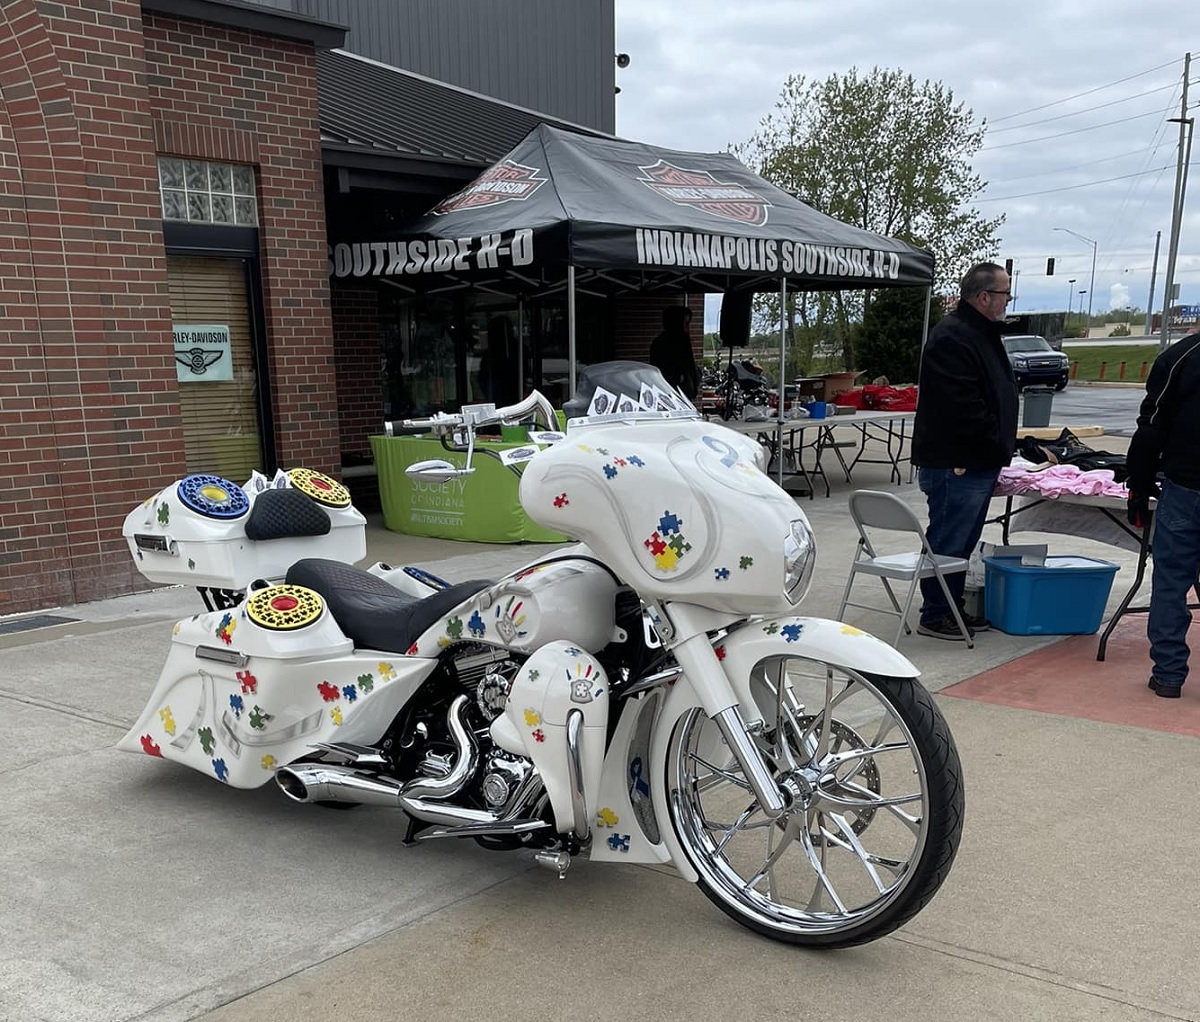 Ride with Indiana Widows Sons at Indianapolis Southside Harley-Davidson, promoting Autism Awareness